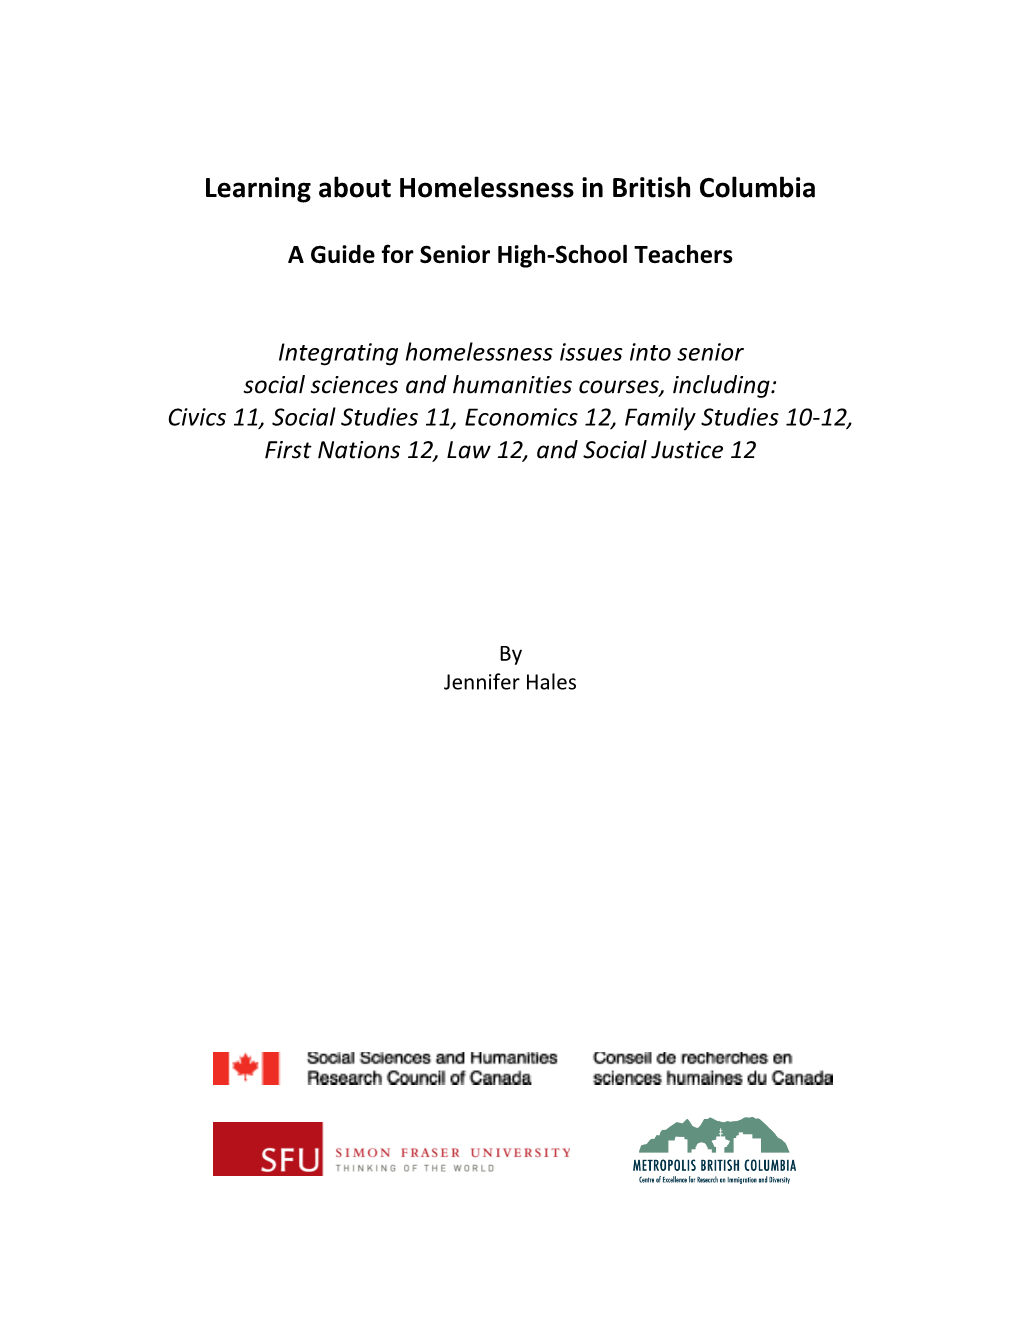 Learning About Homelessness in British Columbia